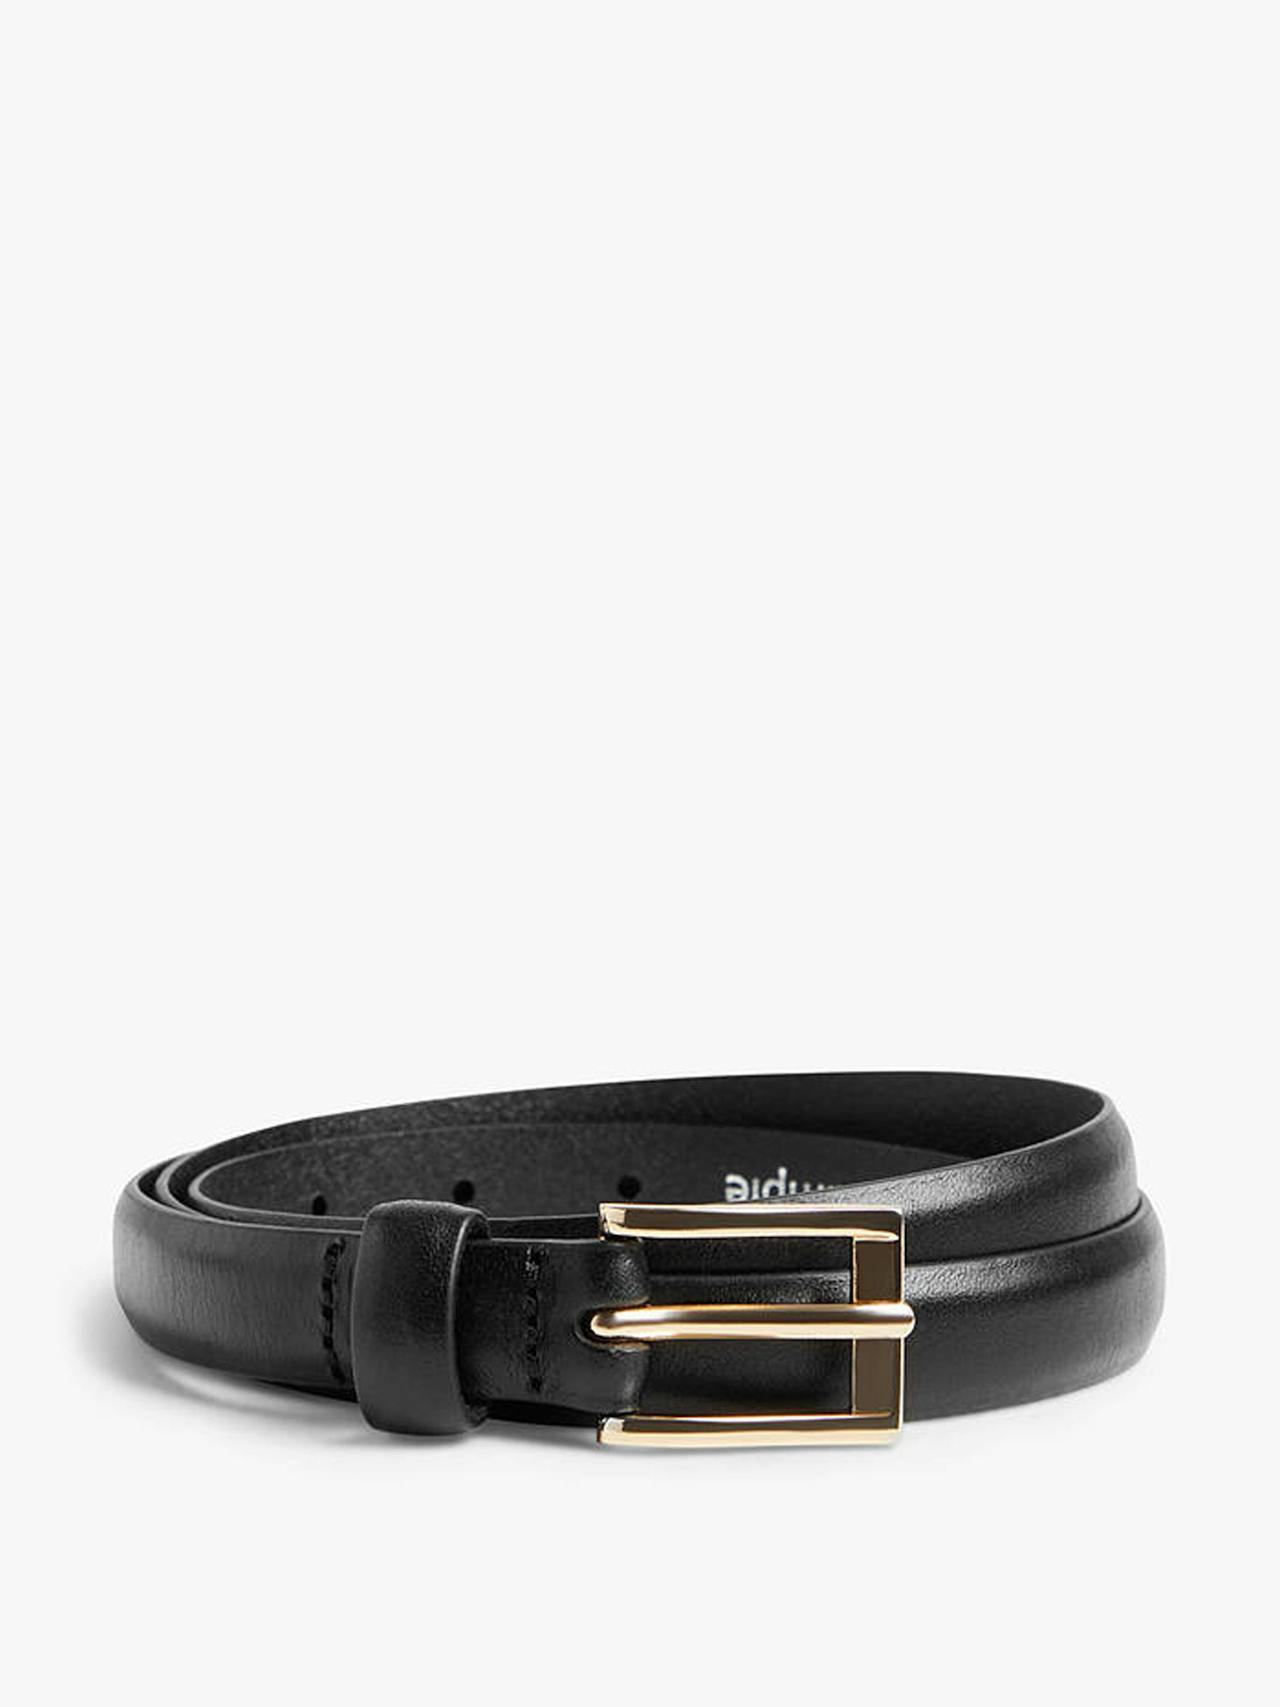 Square buckle narrow leather belt